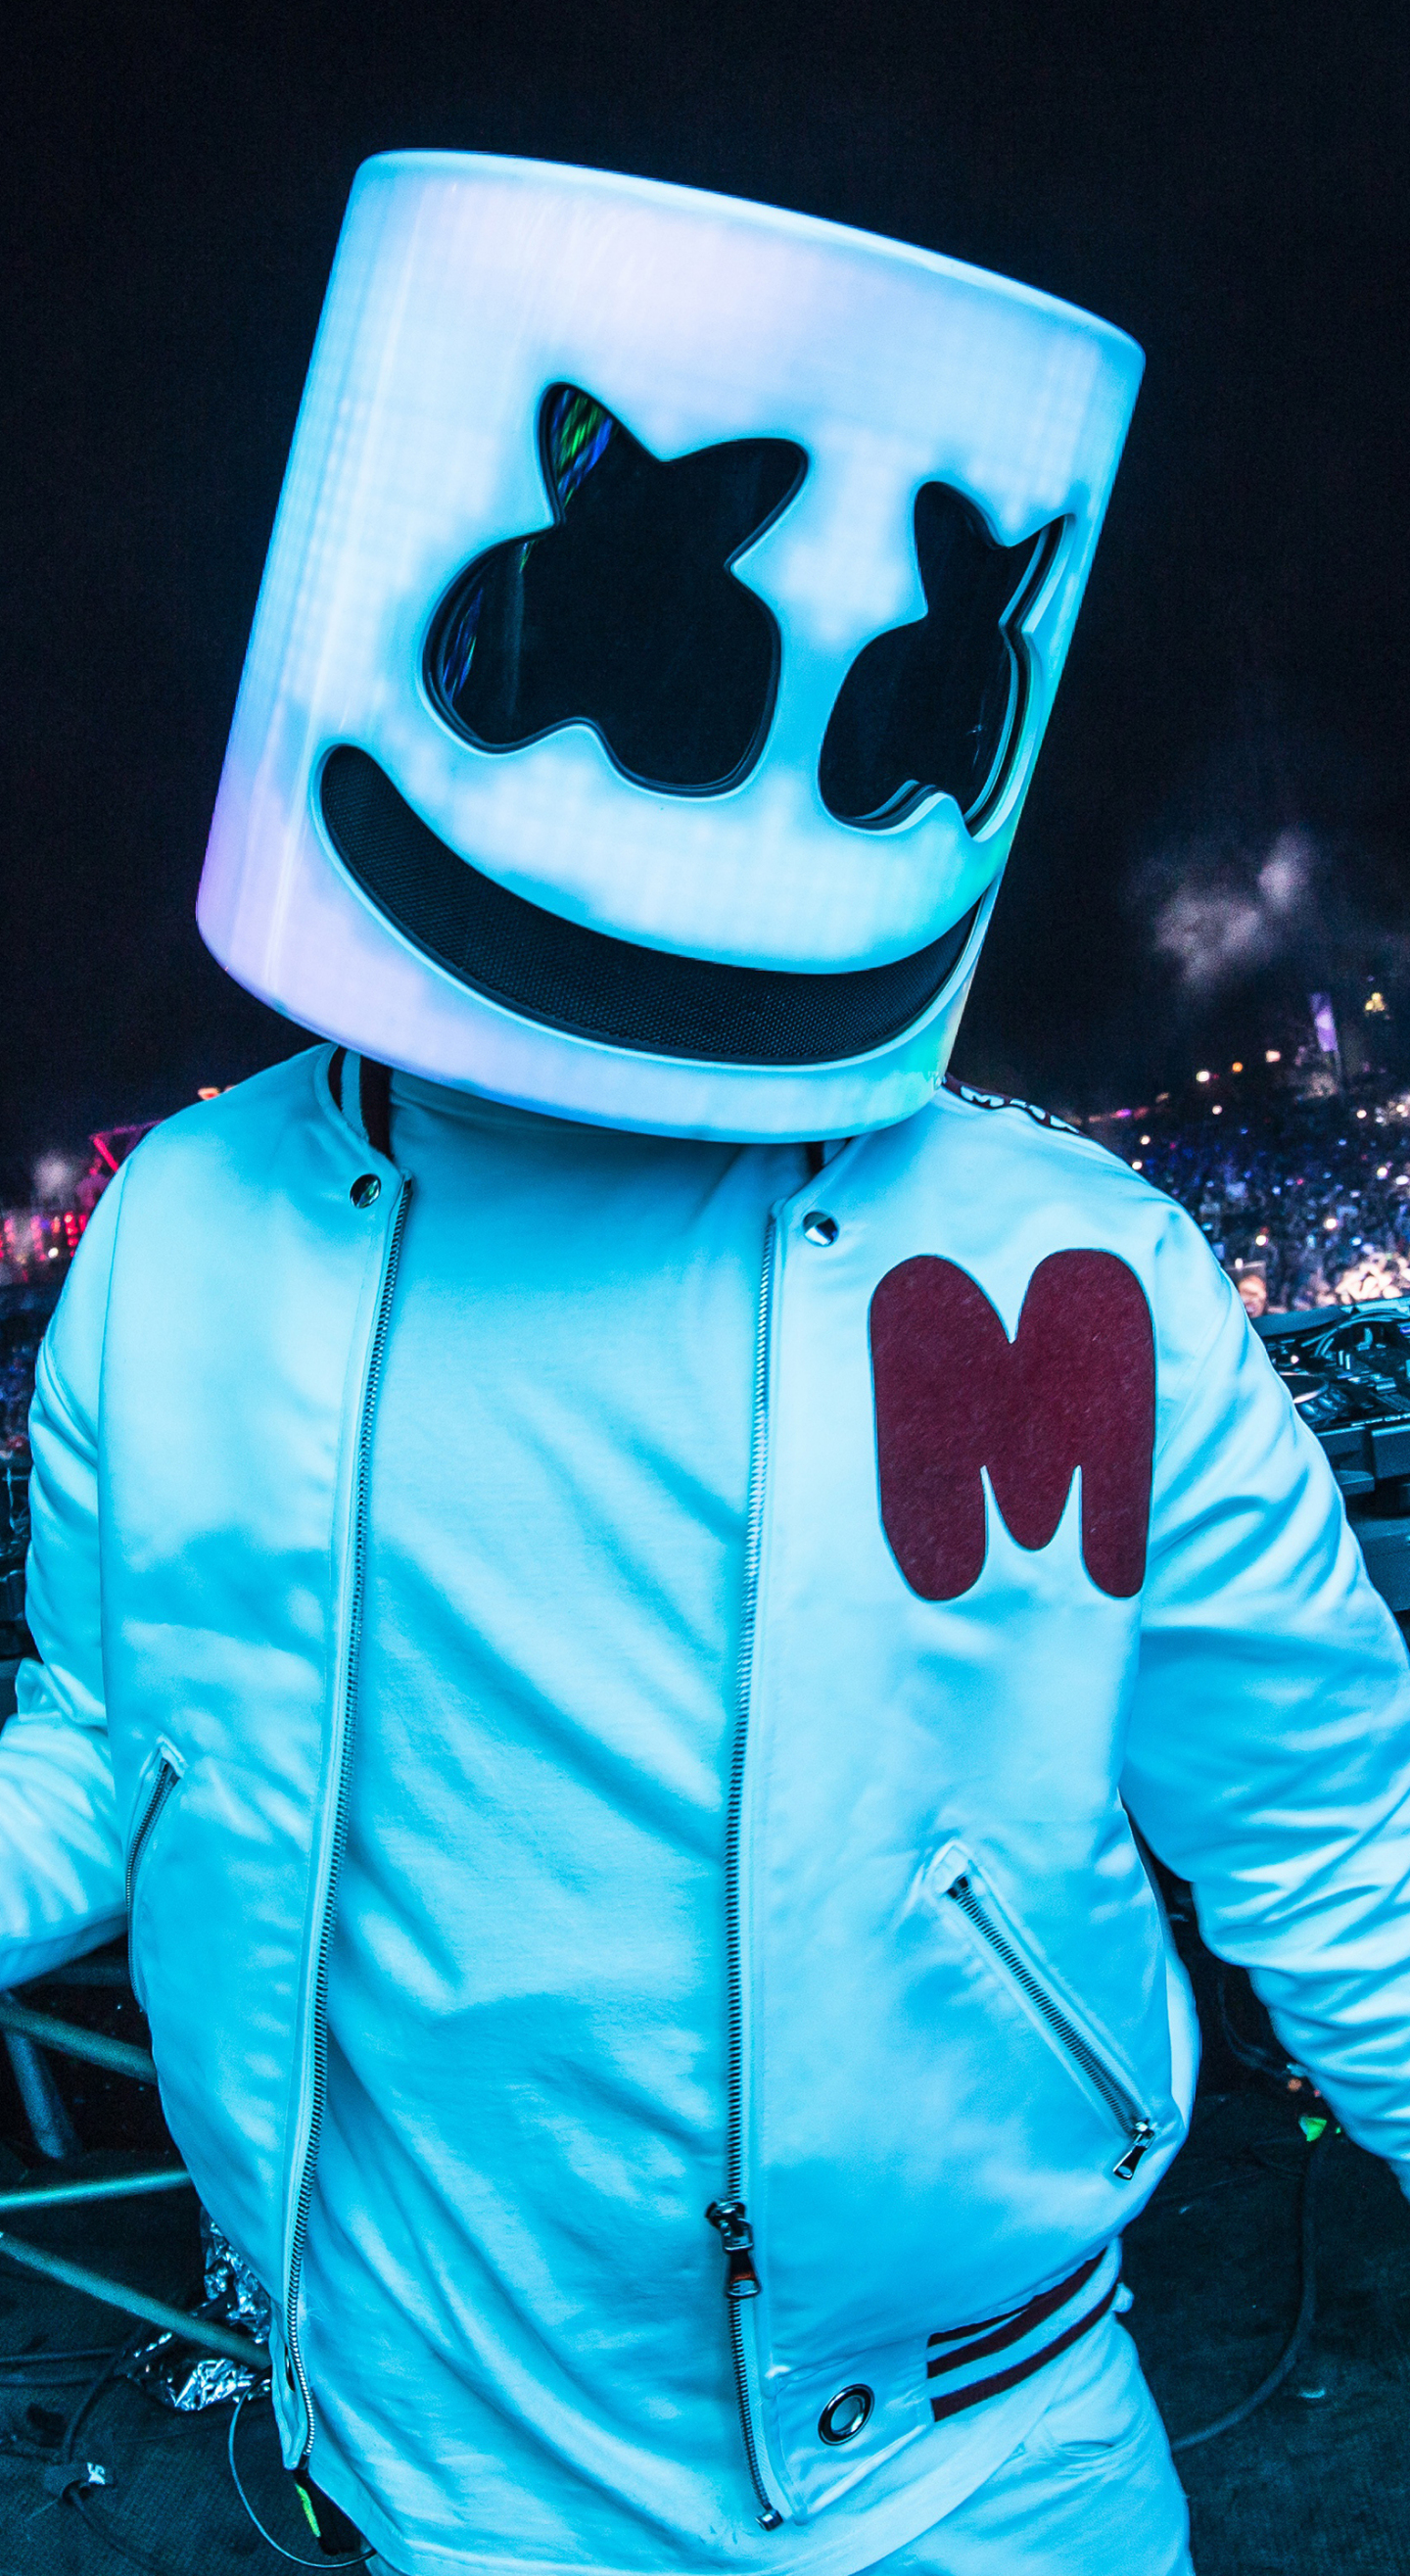 Download wallpaper 1440x2630 live concert, music, marshmello, samsung  galaxy note 8, 1440x2630 hd background, 22401